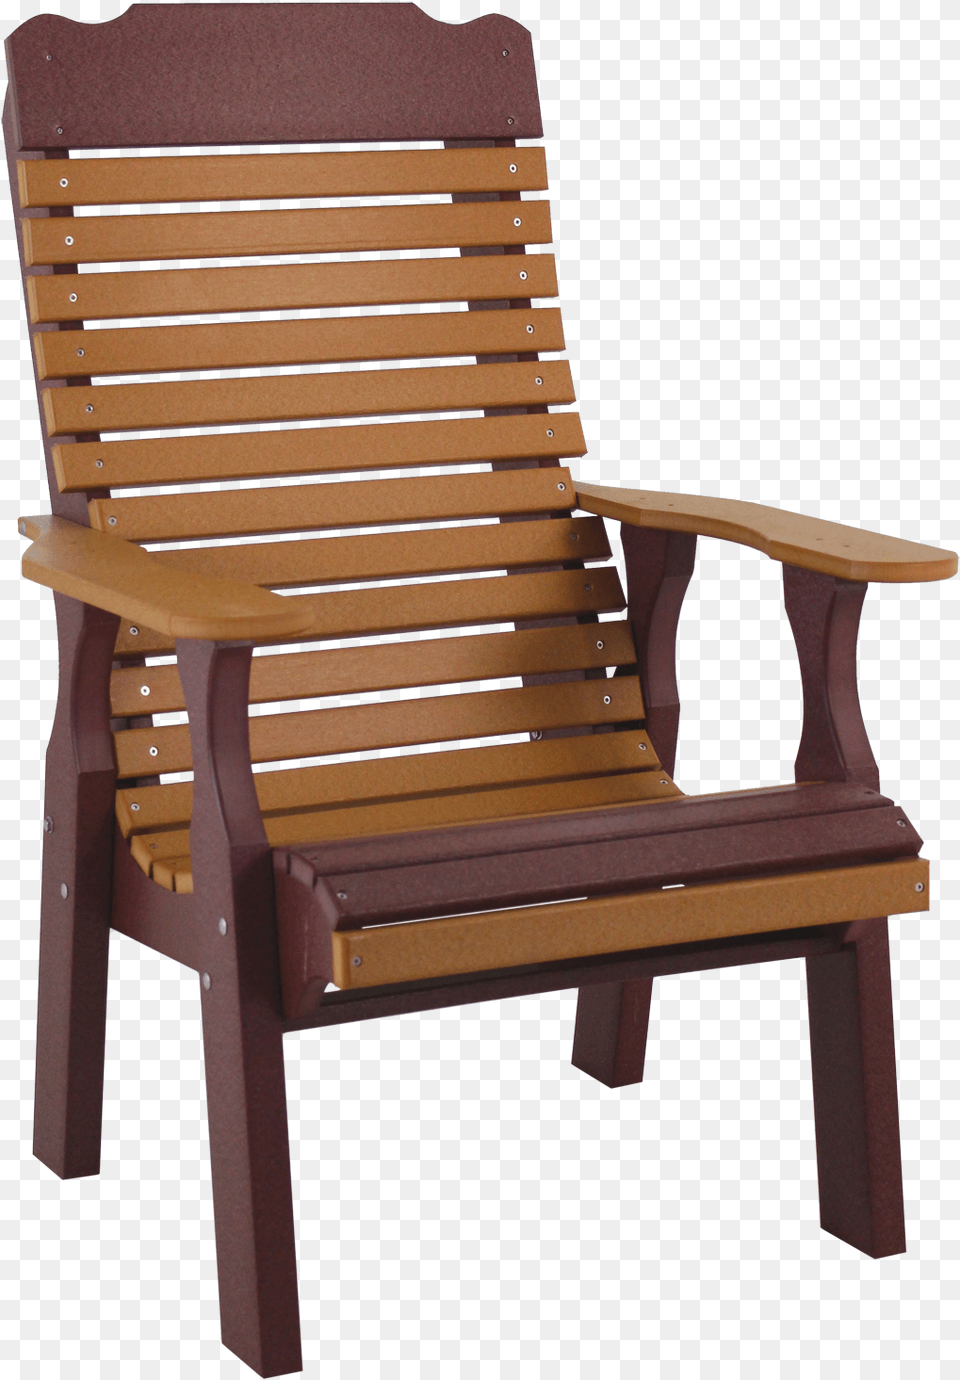 Pine Creek Structures Poly Outdoor Patio Furniture Patio Chair, Bench, Armchair Png Image